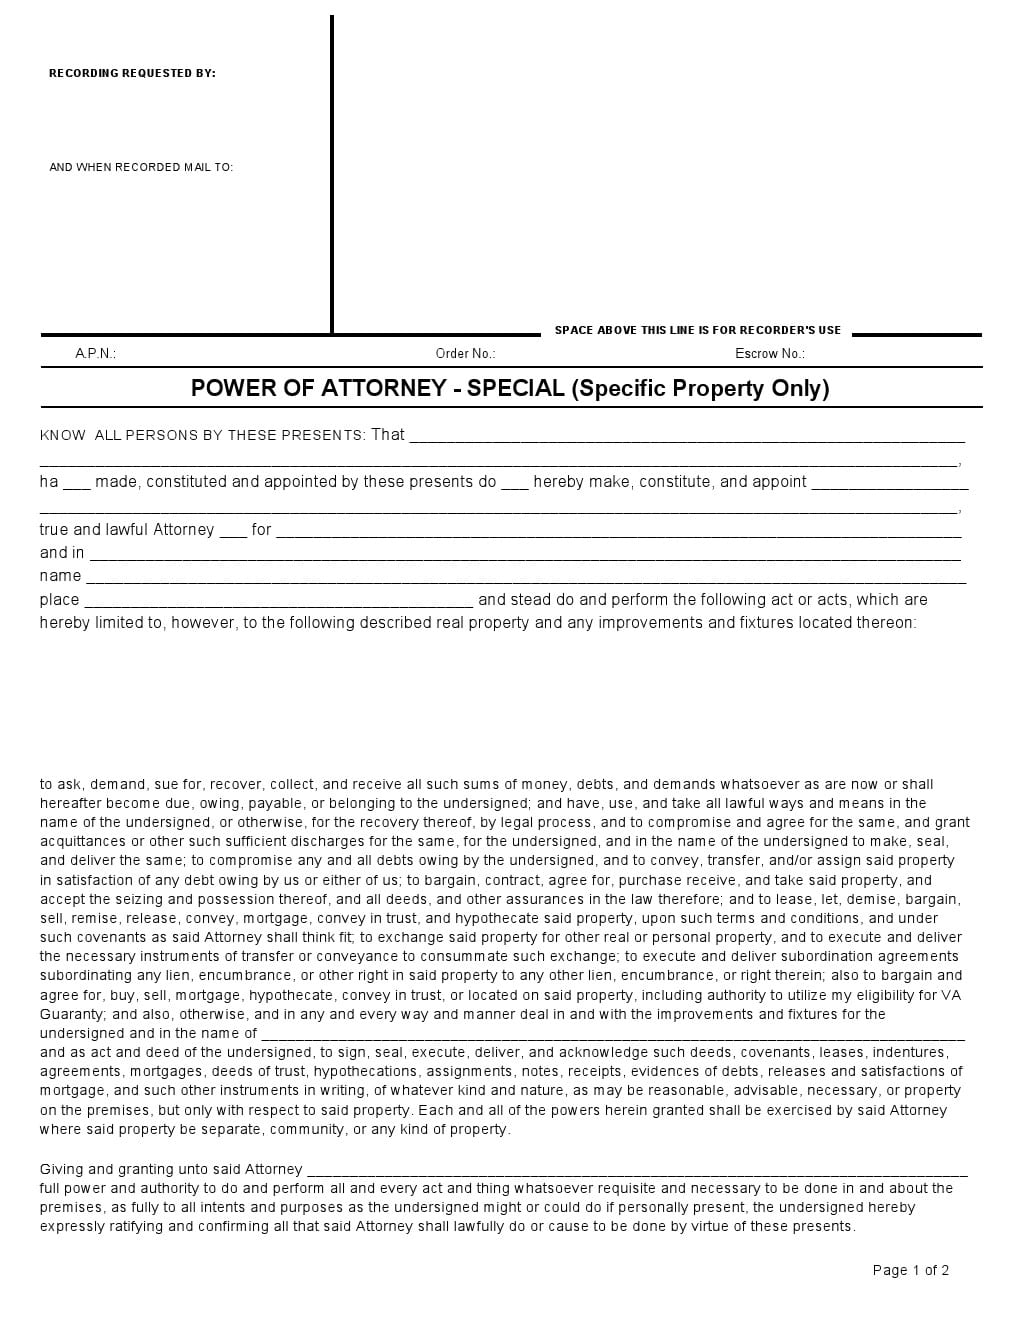 free-california-specific-property-special-power-of-attorney-form